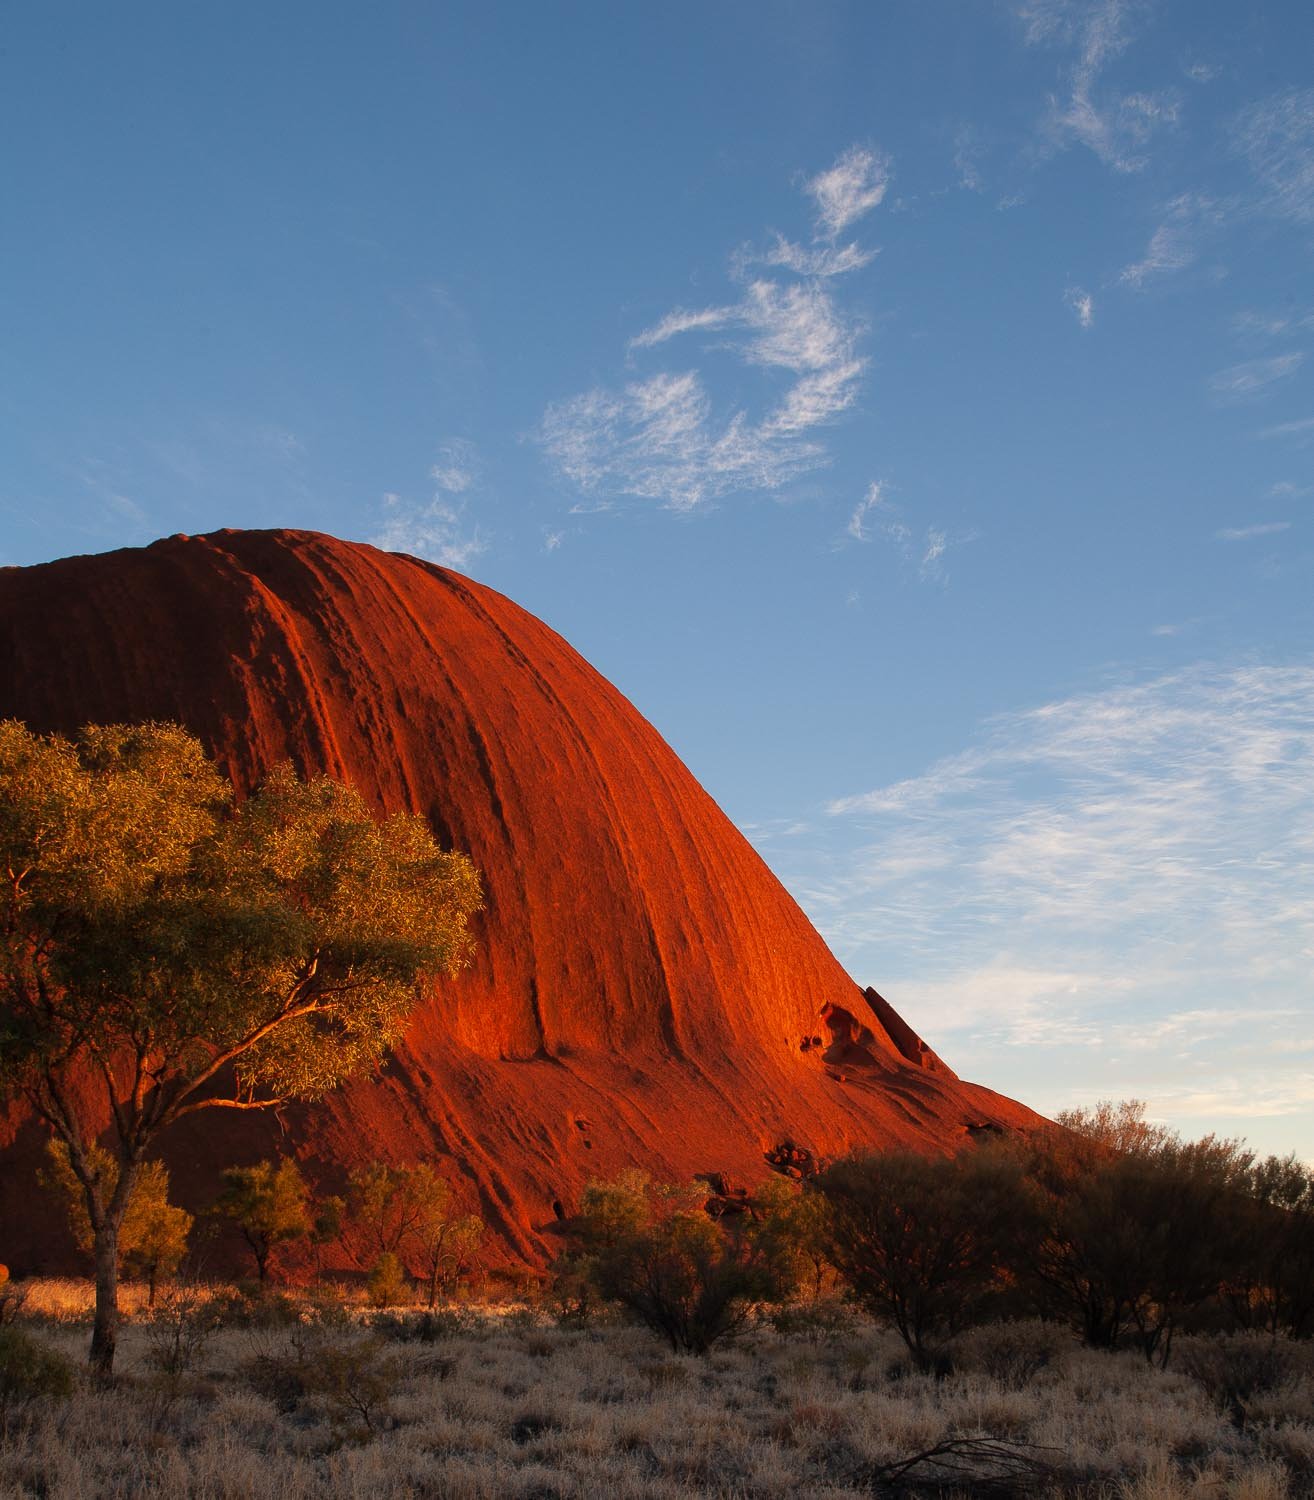 Burning orange color mountain with some bushes and plants on the ground below, Uluru Glow at sunrise - Northern Territory